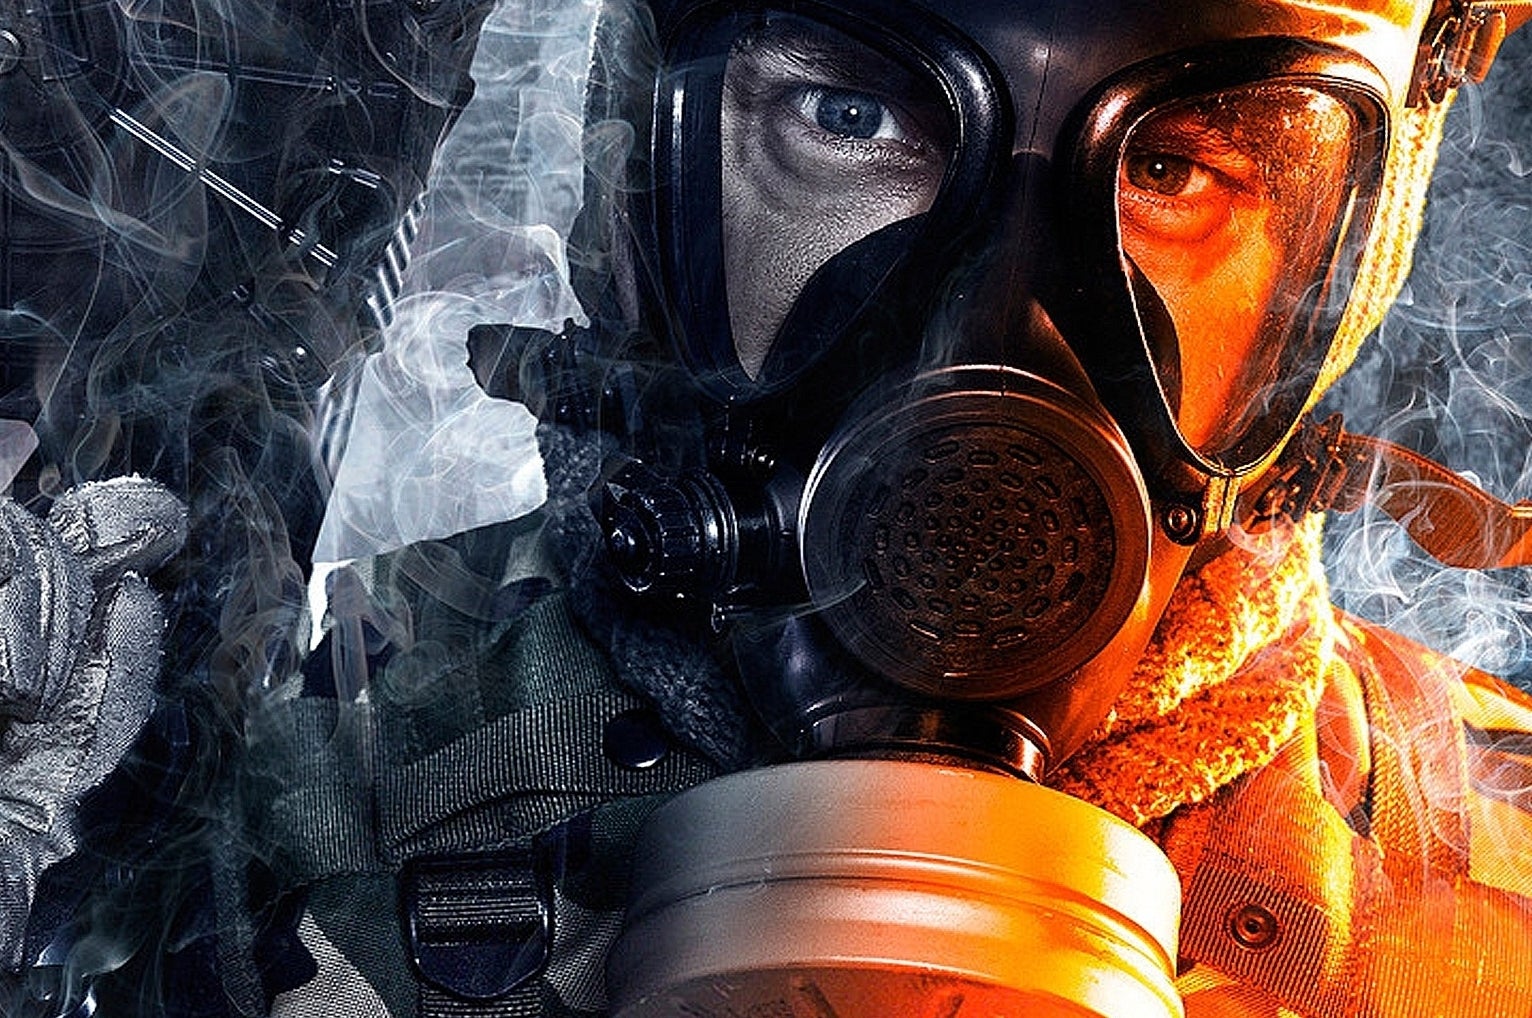 Image for Bach on the Frontline: Battlefield 4's lead producer readies for war